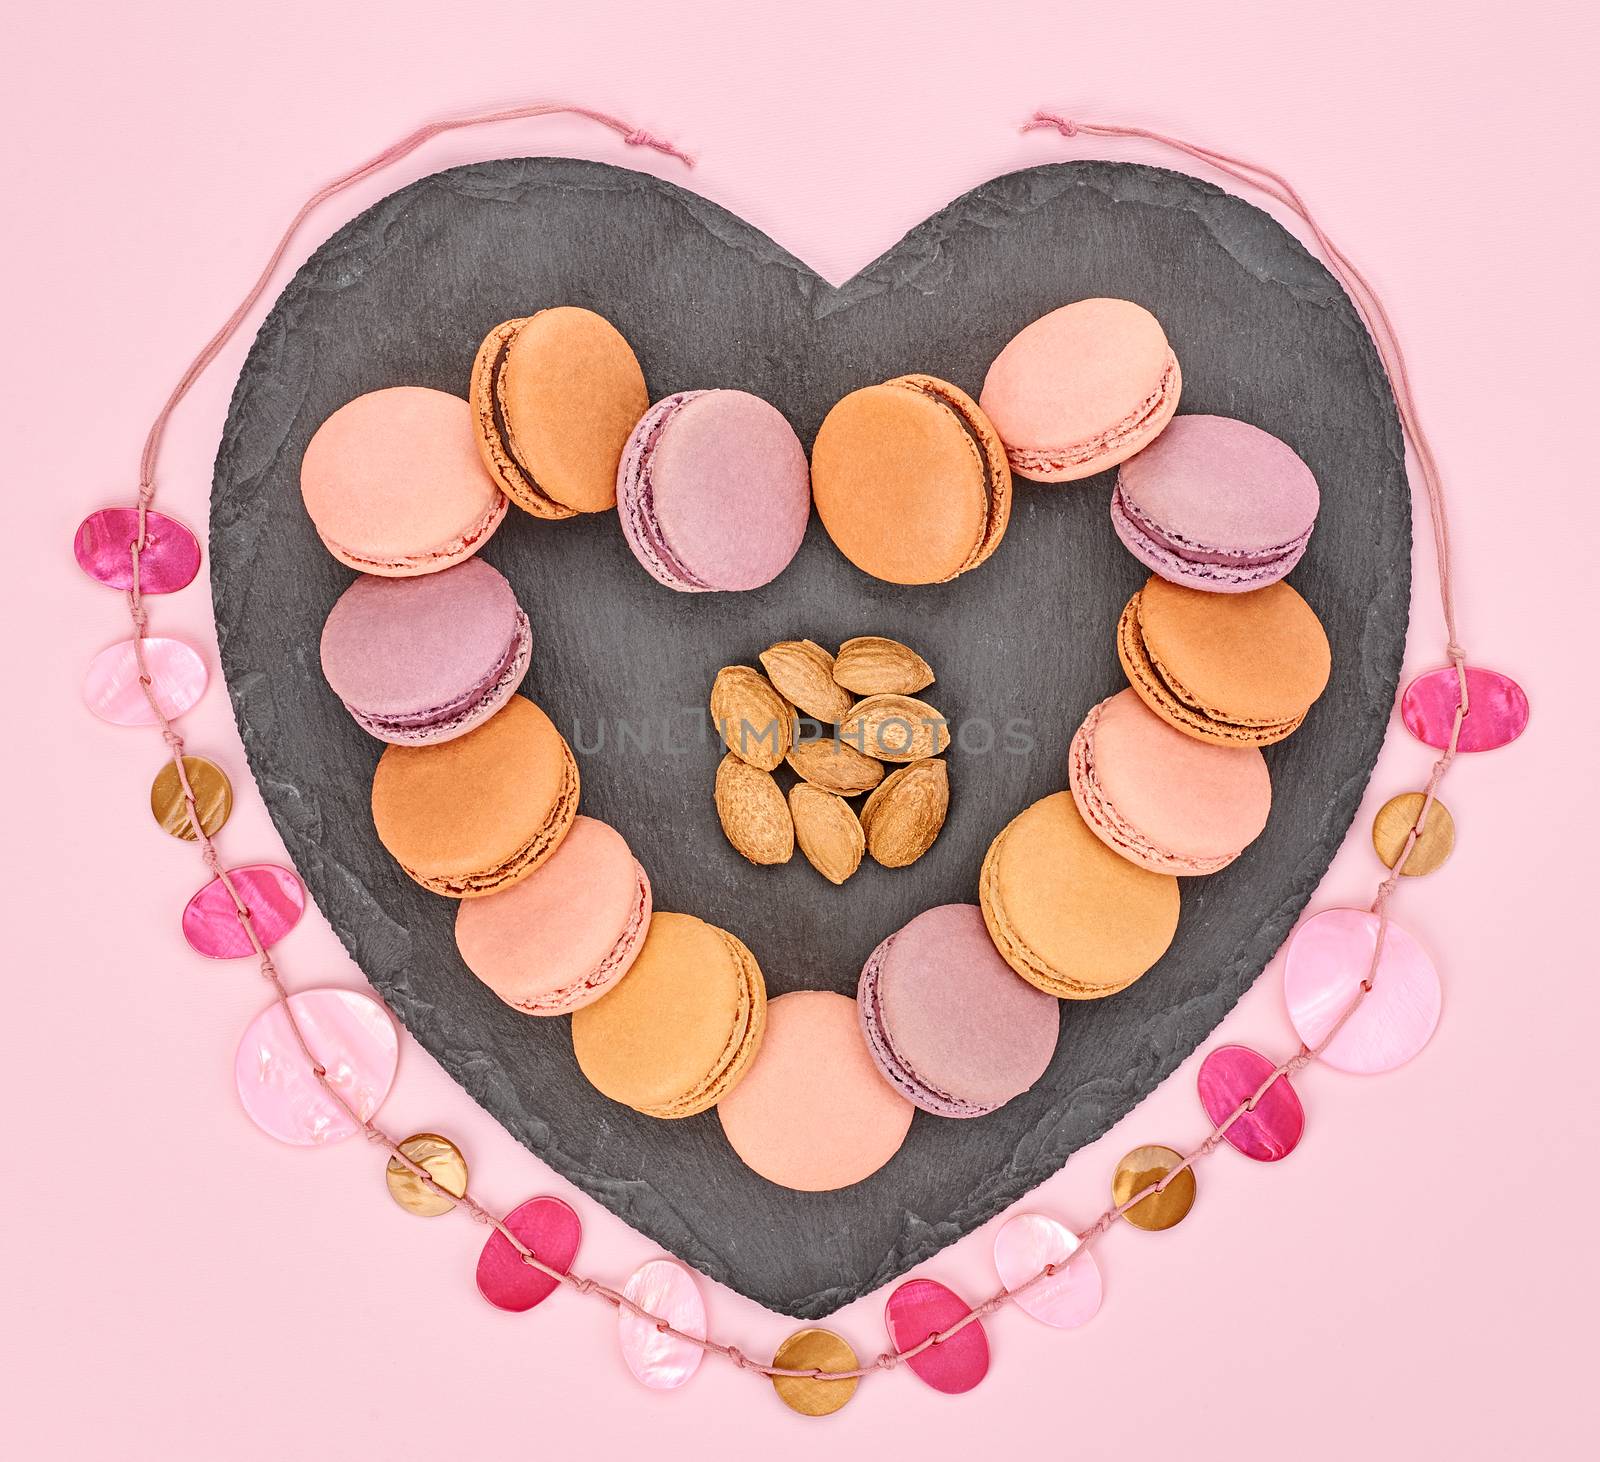 Still life, macarons, heart shape. Love concept  by 918